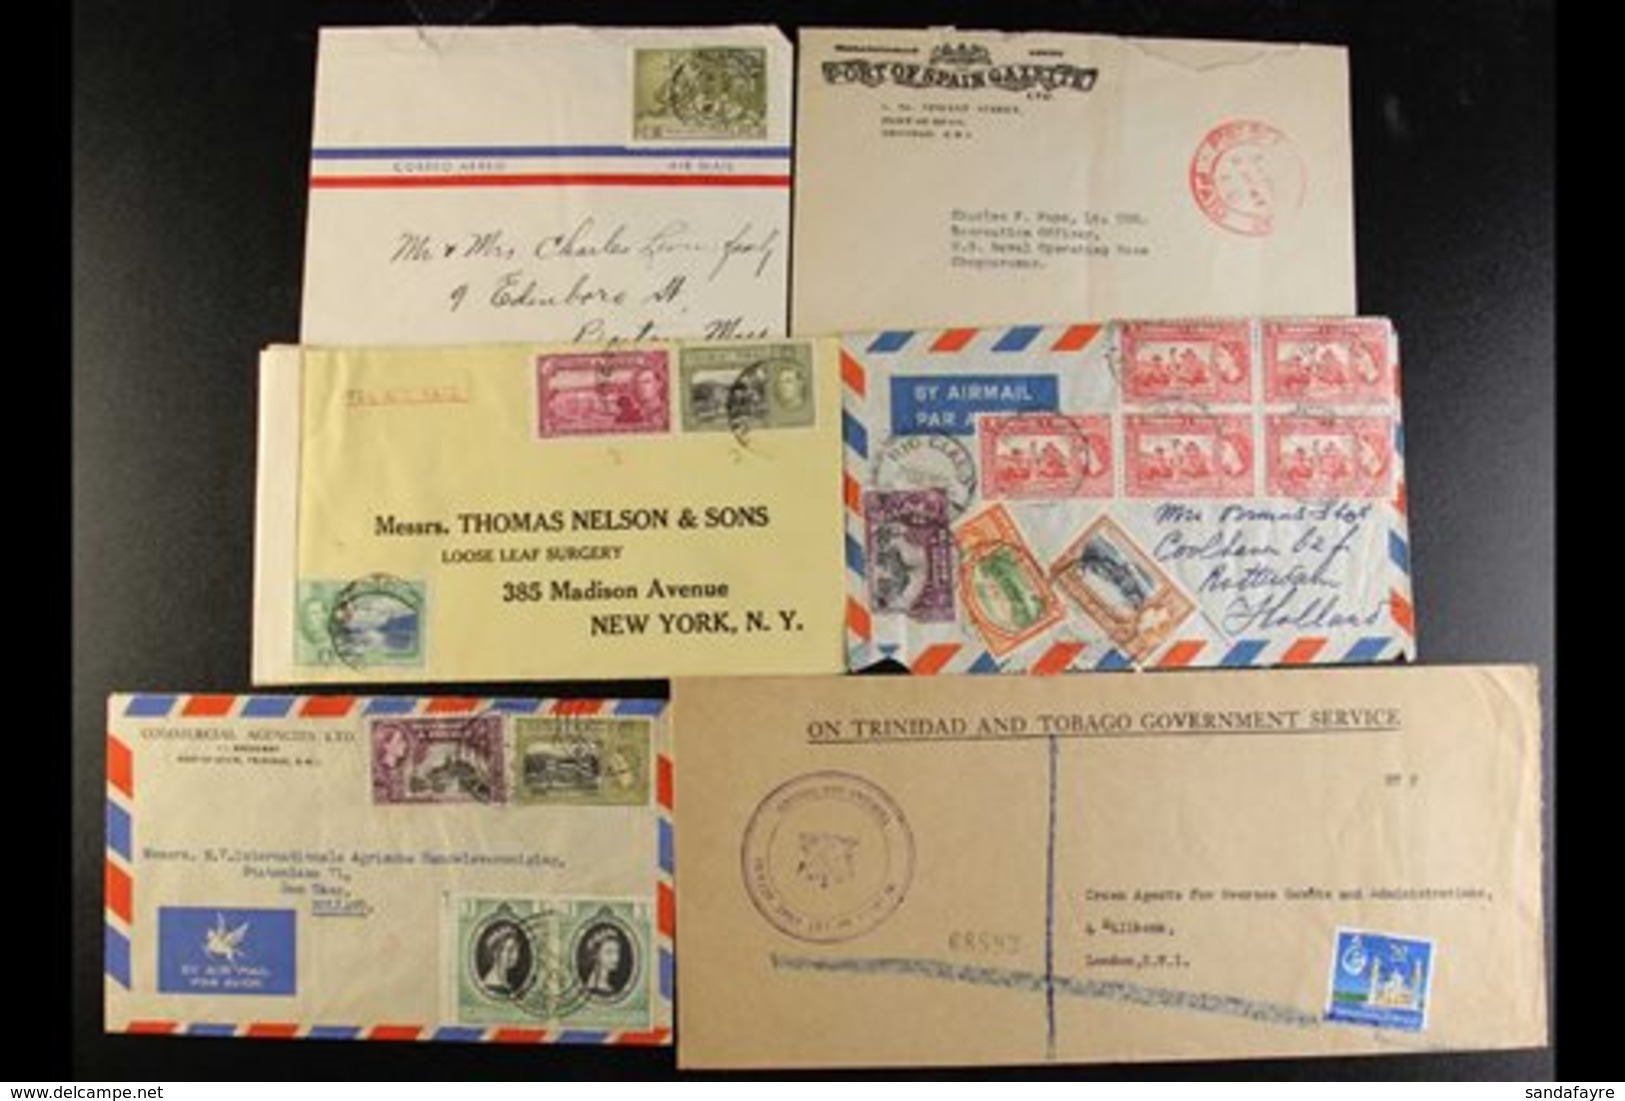 POSTAL HISTORY ACCUMULATION Majority Is Commercial Mail From KGVI / Early QEII Period, We Note 1942 Censored Cover To Ne - Trinidad & Tobago (...-1961)